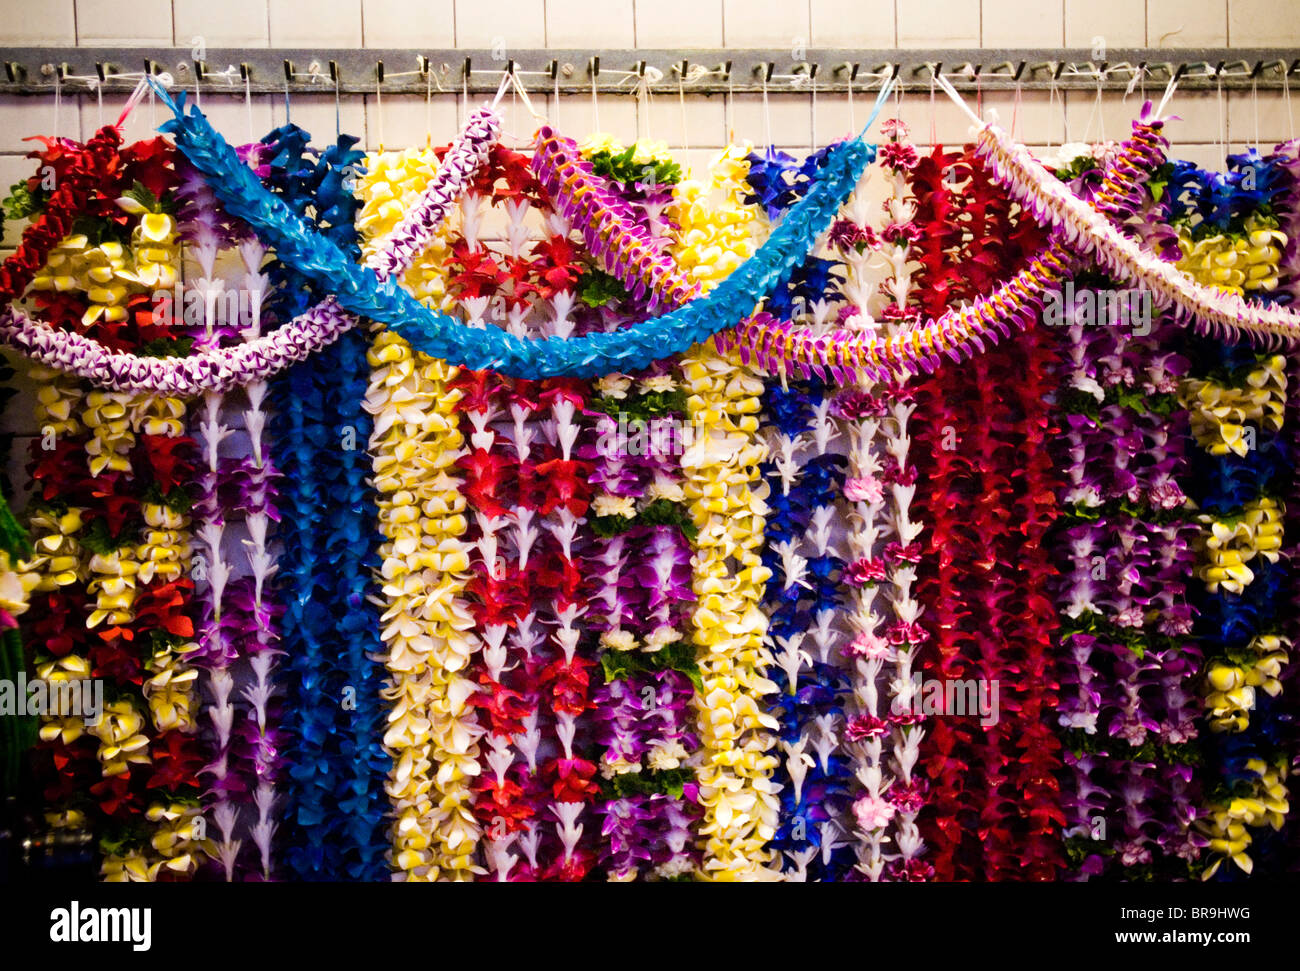 Colorful Hawaiian leis hang on display at a lei stand at the Honolulu International Airport in Hawaii. Stock Photo